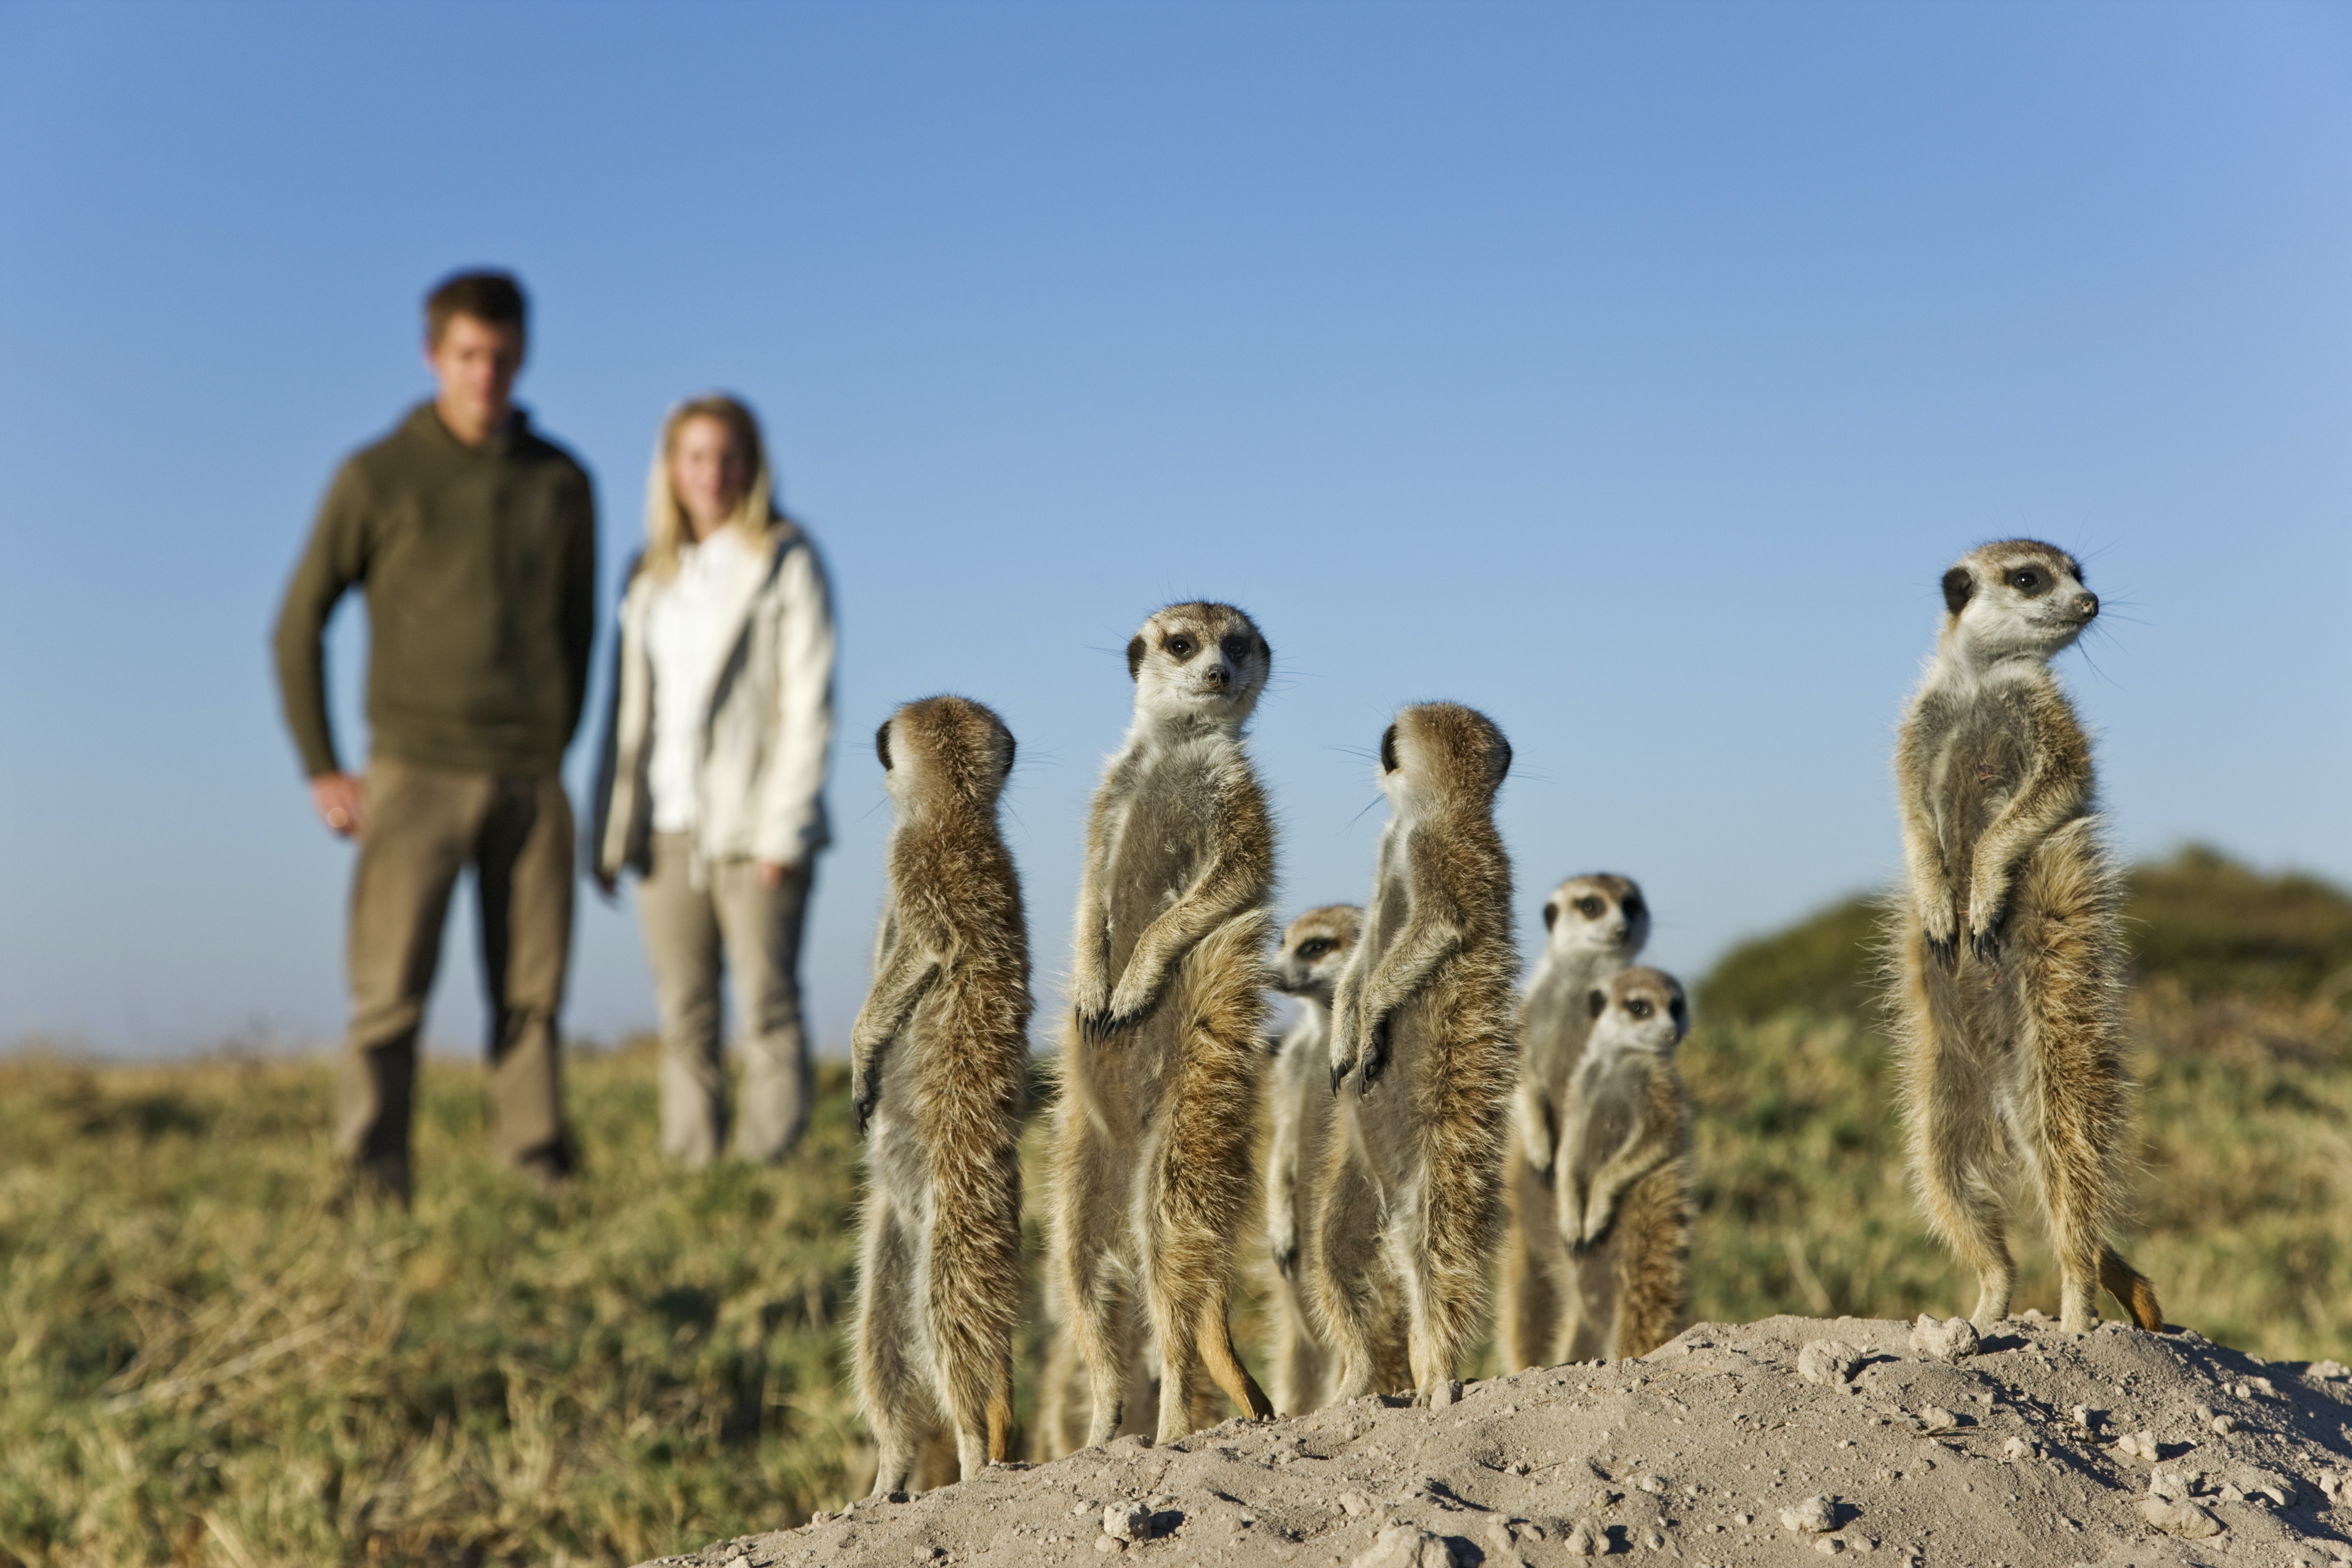 Visitors watch meerkats, stretchy rat-like creatures, standing on their back legs and looking around